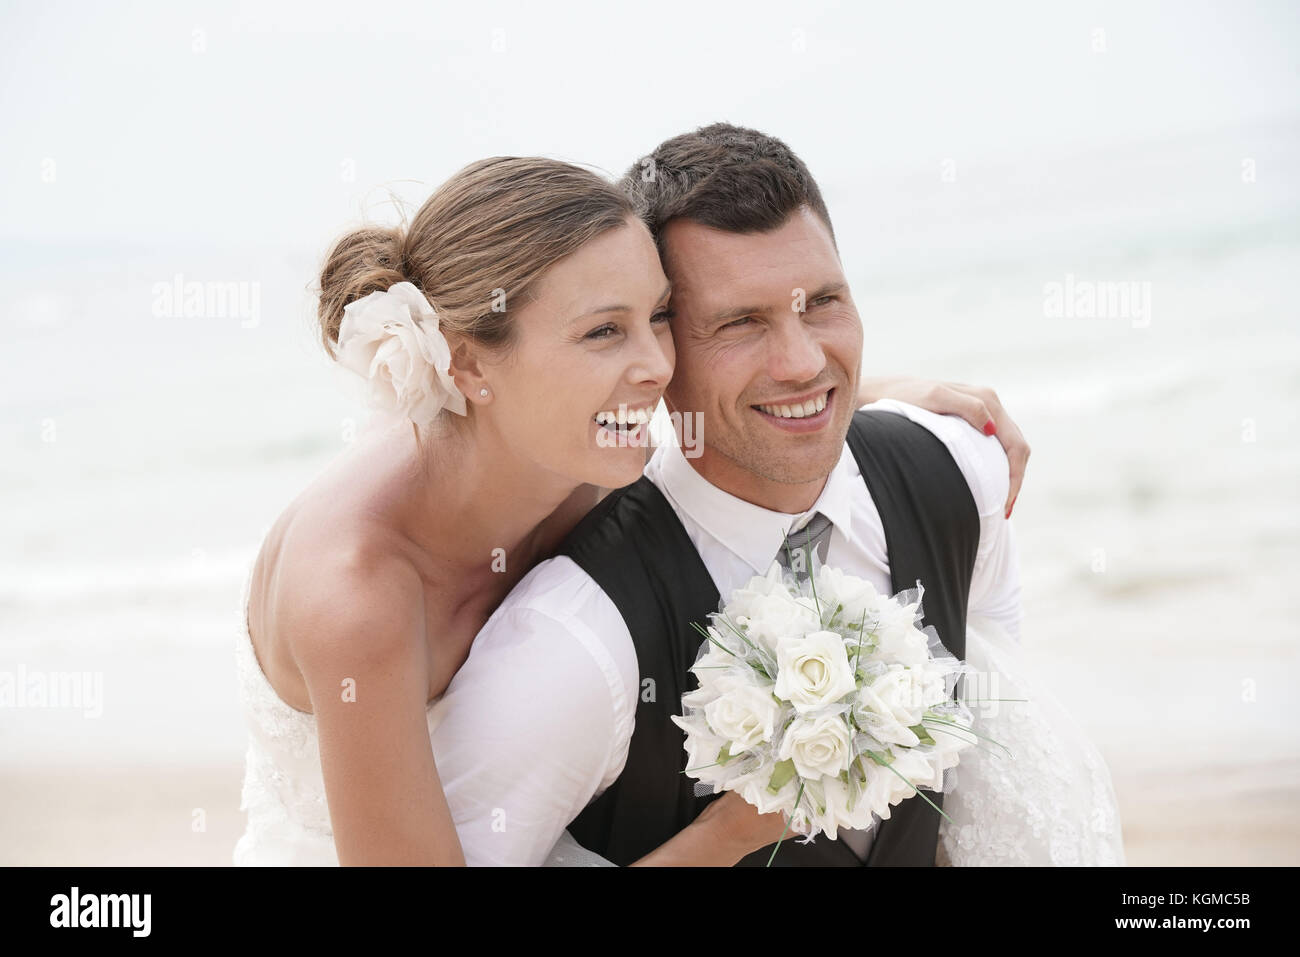 Groom giving piggyback ride to bride on the beach Stock Photo